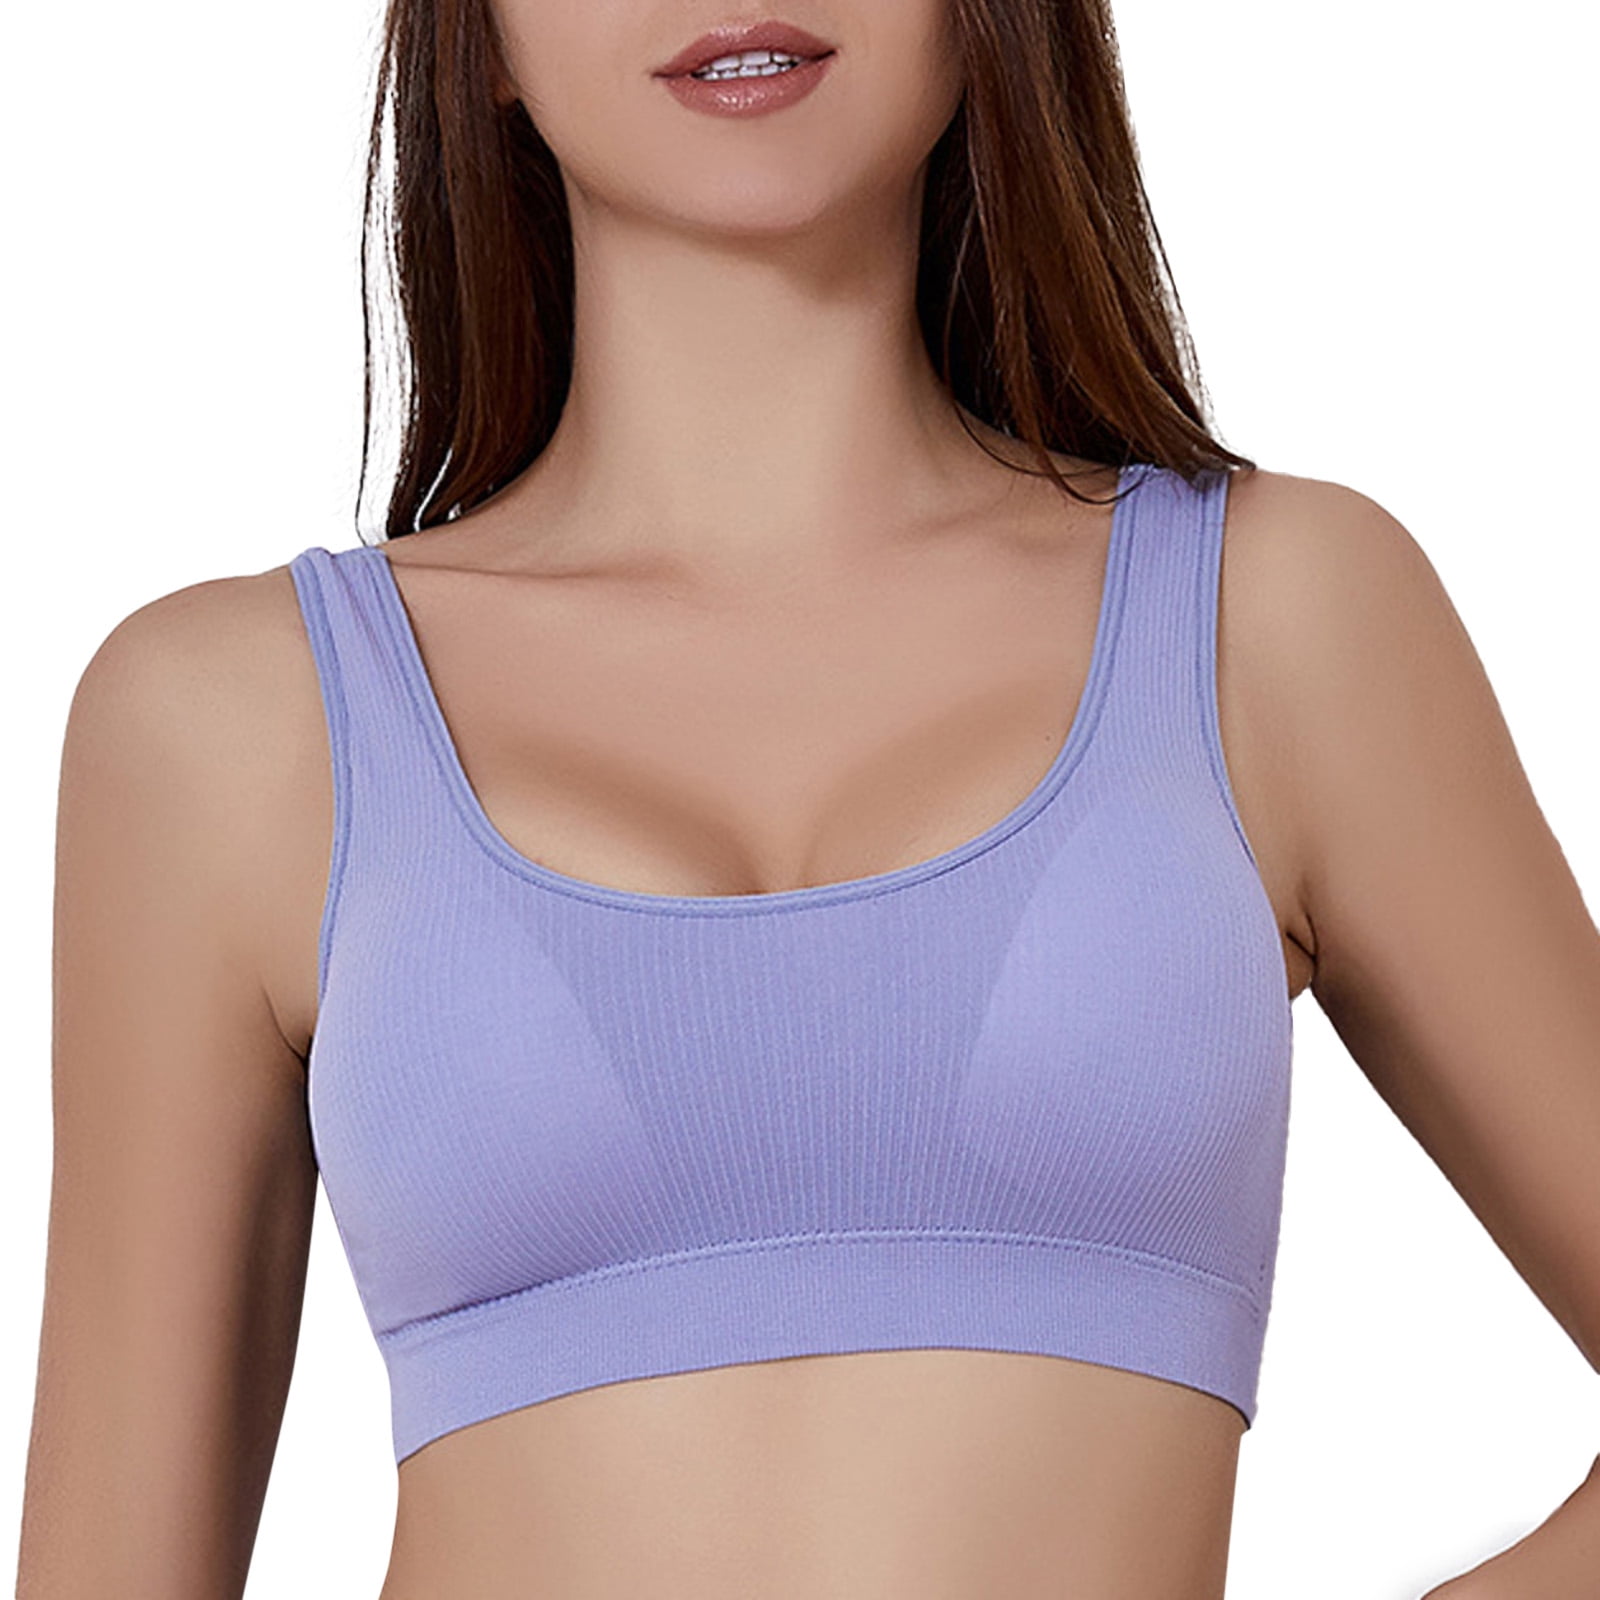 adviicd She Fit Sports Bras Women's Seamless Underwire Strapless  Convertible Bralette Bra with Invisible Straps Bra Brassiere B XX-Large 